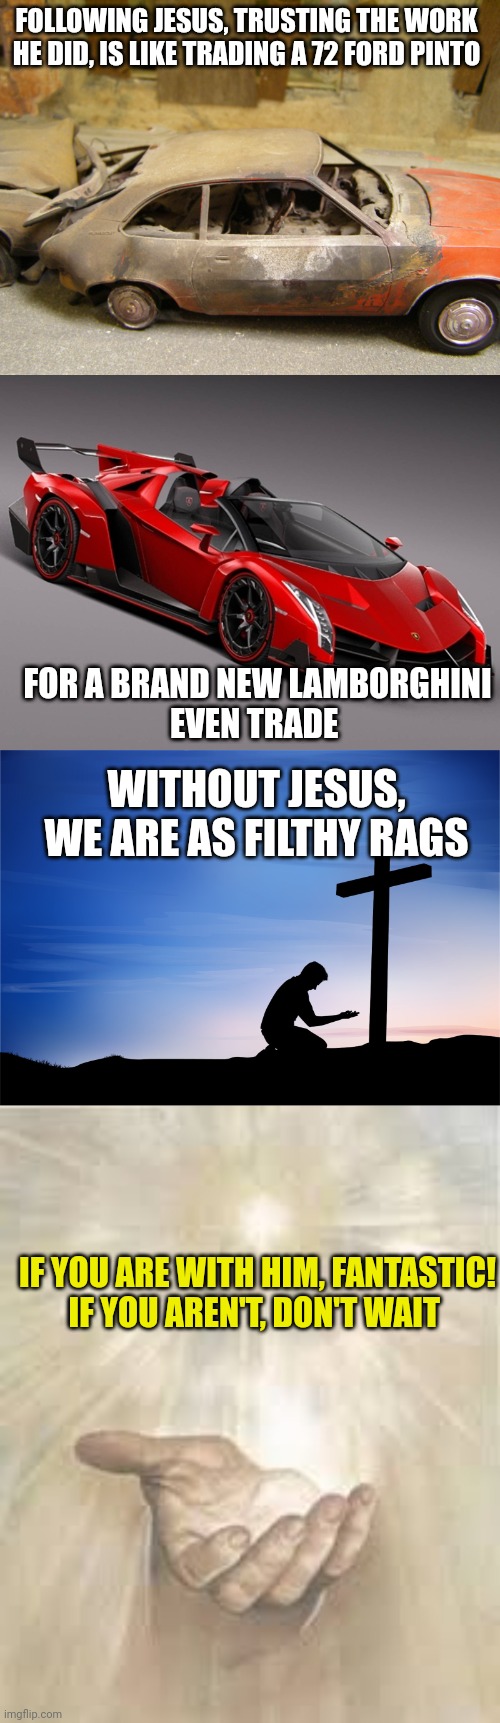 FOLLOWING JESUS, TRUSTING THE WORK HE DID, IS LIKE TRADING A 72 FORD PINTO; FOR A BRAND NEW LAMBORGHINI
EVEN TRADE; WITHOUT JESUS, WE ARE AS FILTHY RAGS; IF YOU ARE WITH HIM, FANTASTIC!
IF YOU AREN'T, DON'T WAIT | image tagged in pinto,lamborghini,kneeling at cross,jesus beckoning | made w/ Imgflip meme maker